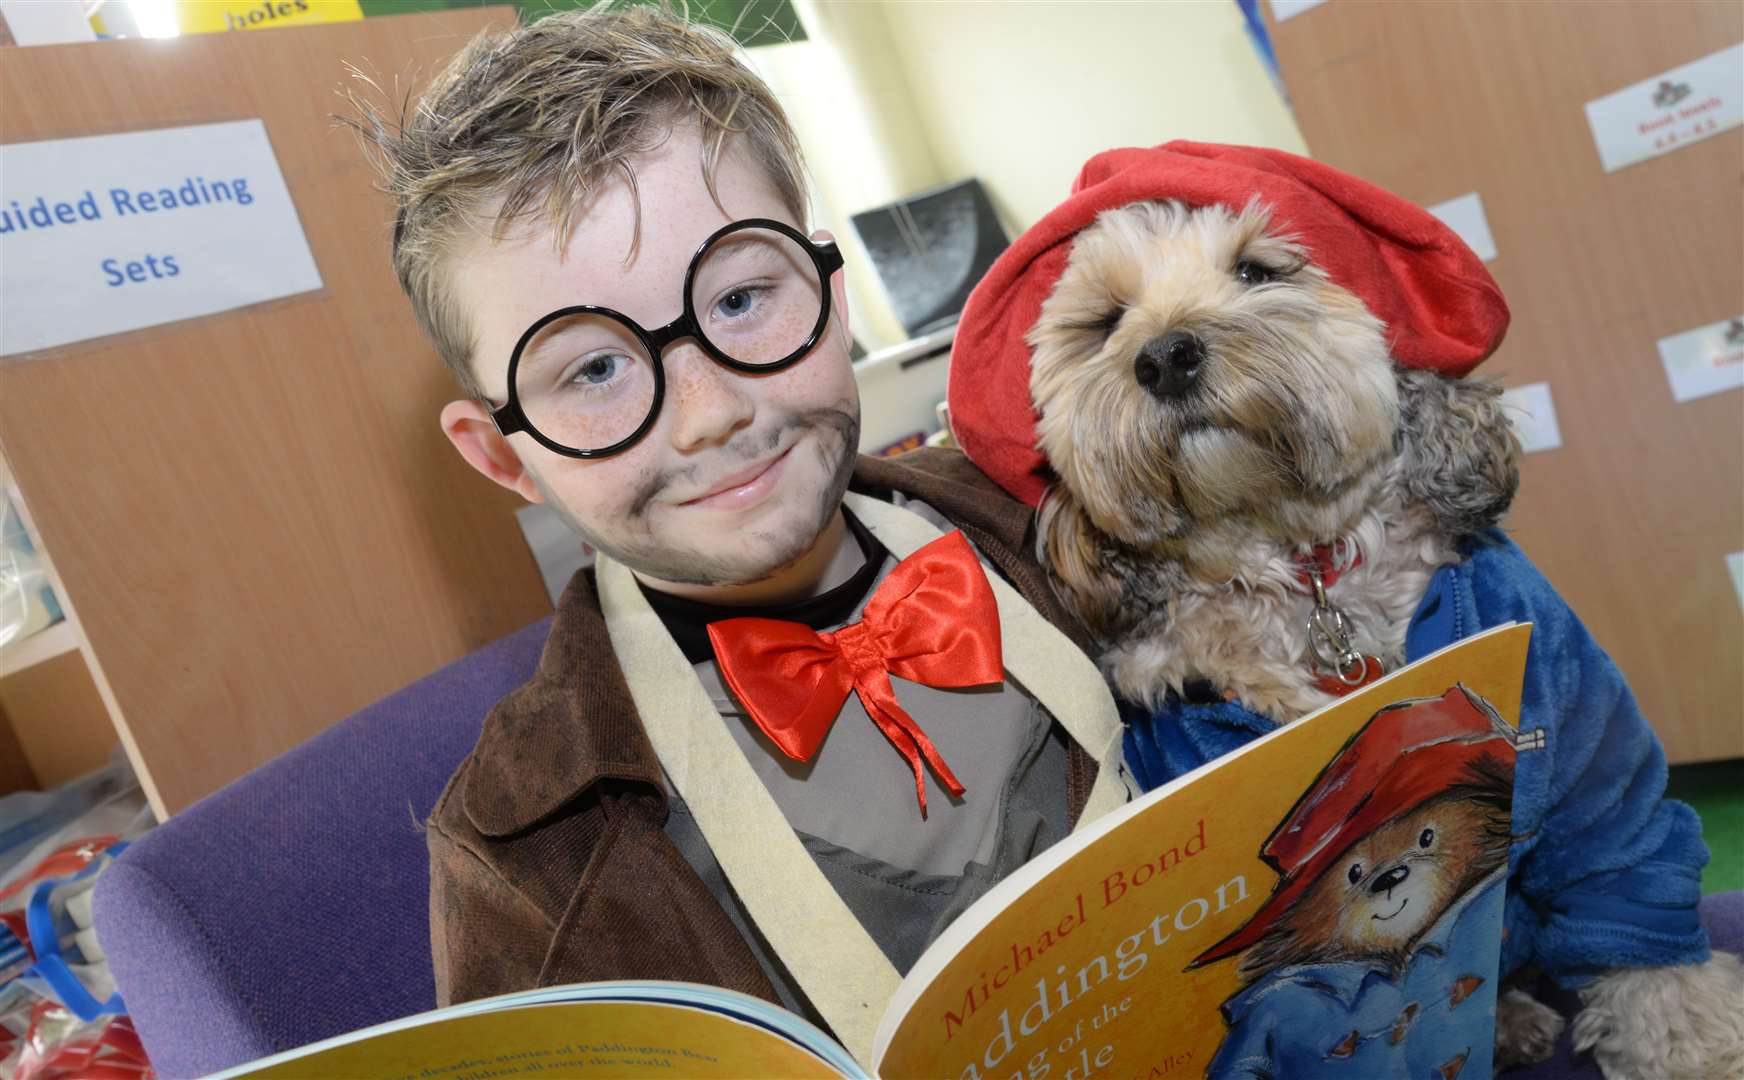 World Book Day celebrations are expected to take place across Kent today